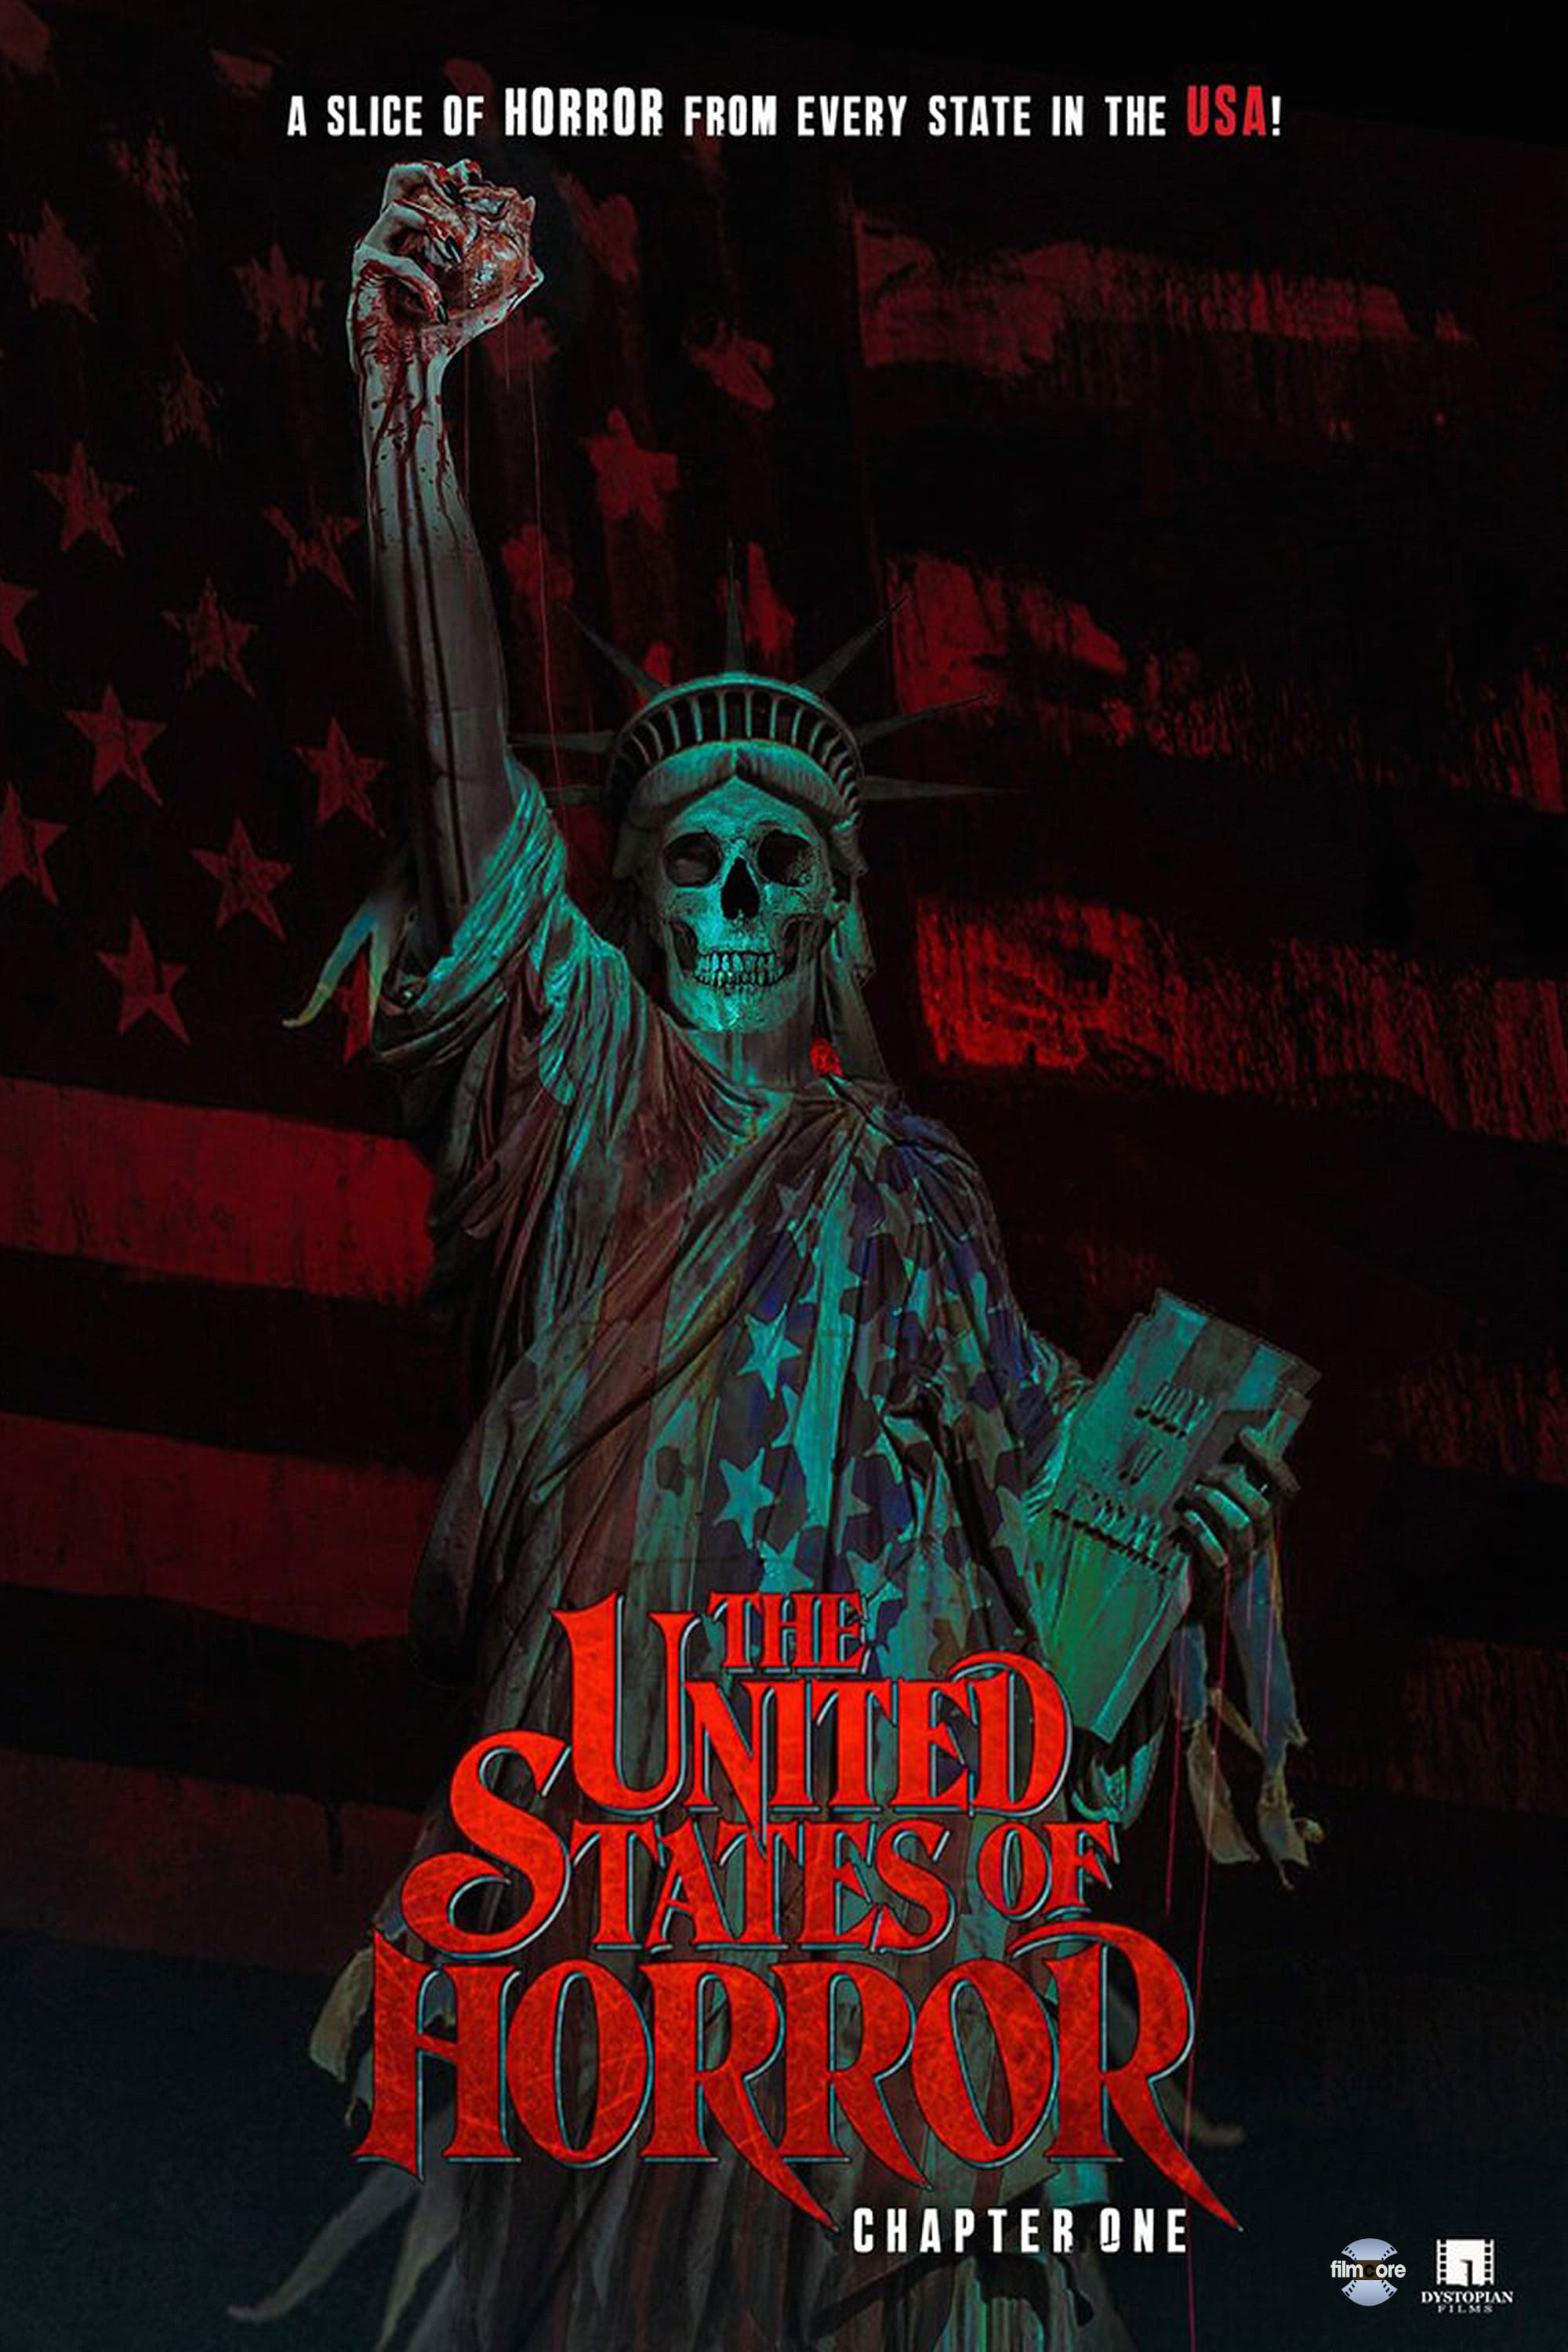 The United States of Horror: Chapter 1 film